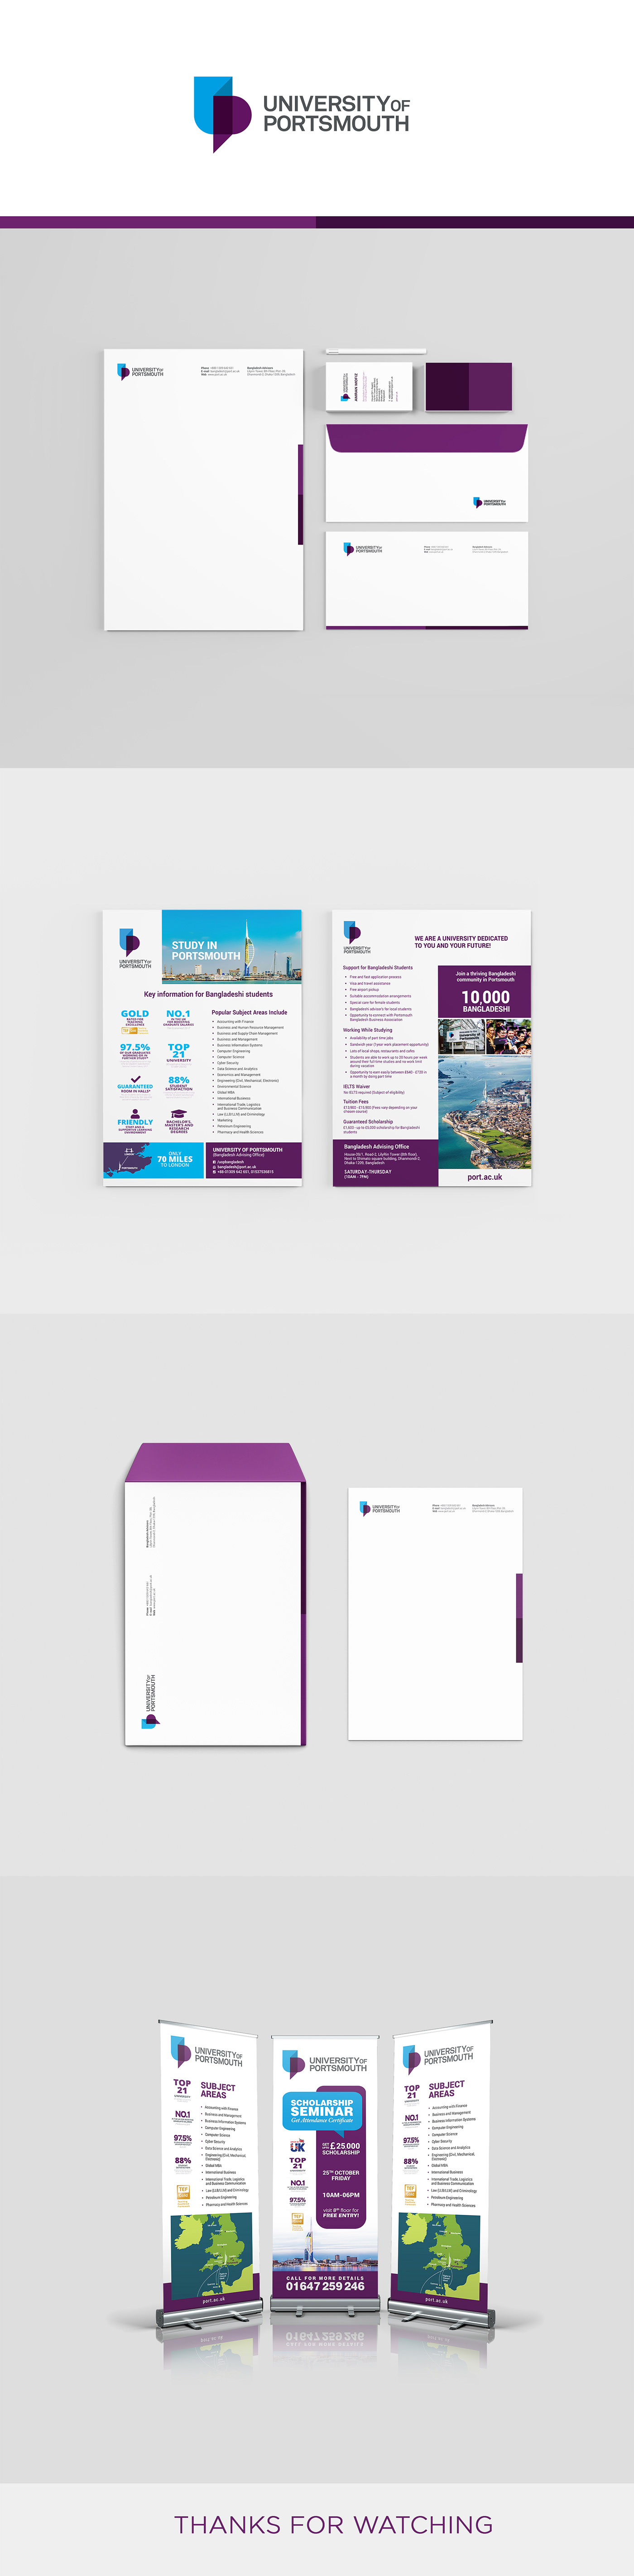 portsmouth University UK Top University scholarship roll-up banner Roll-Up X Banner free creative